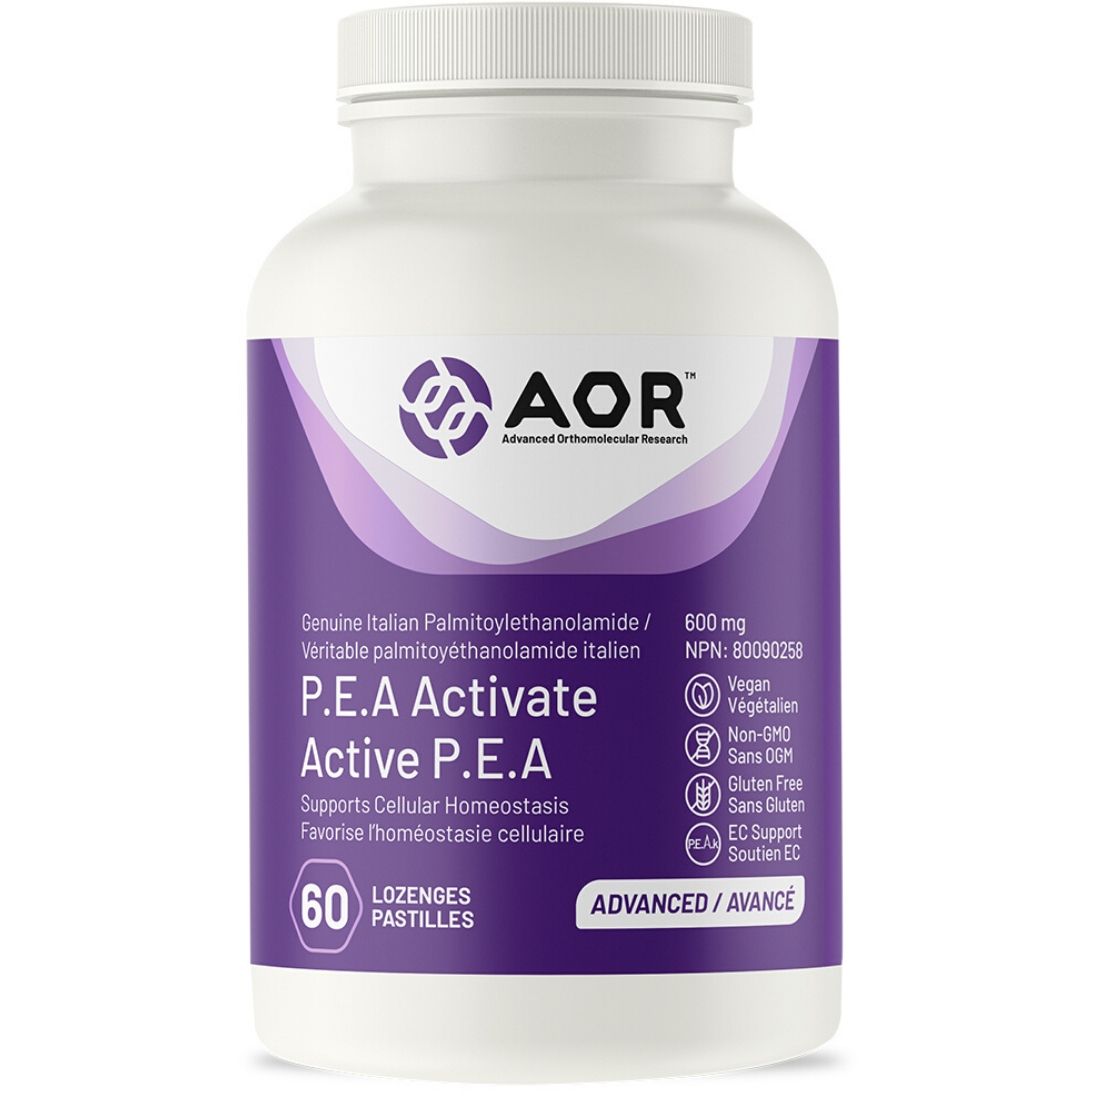 AOR P.E.A.k Activate 600mg (Endocannabinoid System Support), 60 Watermelon Flavoured Lozenge